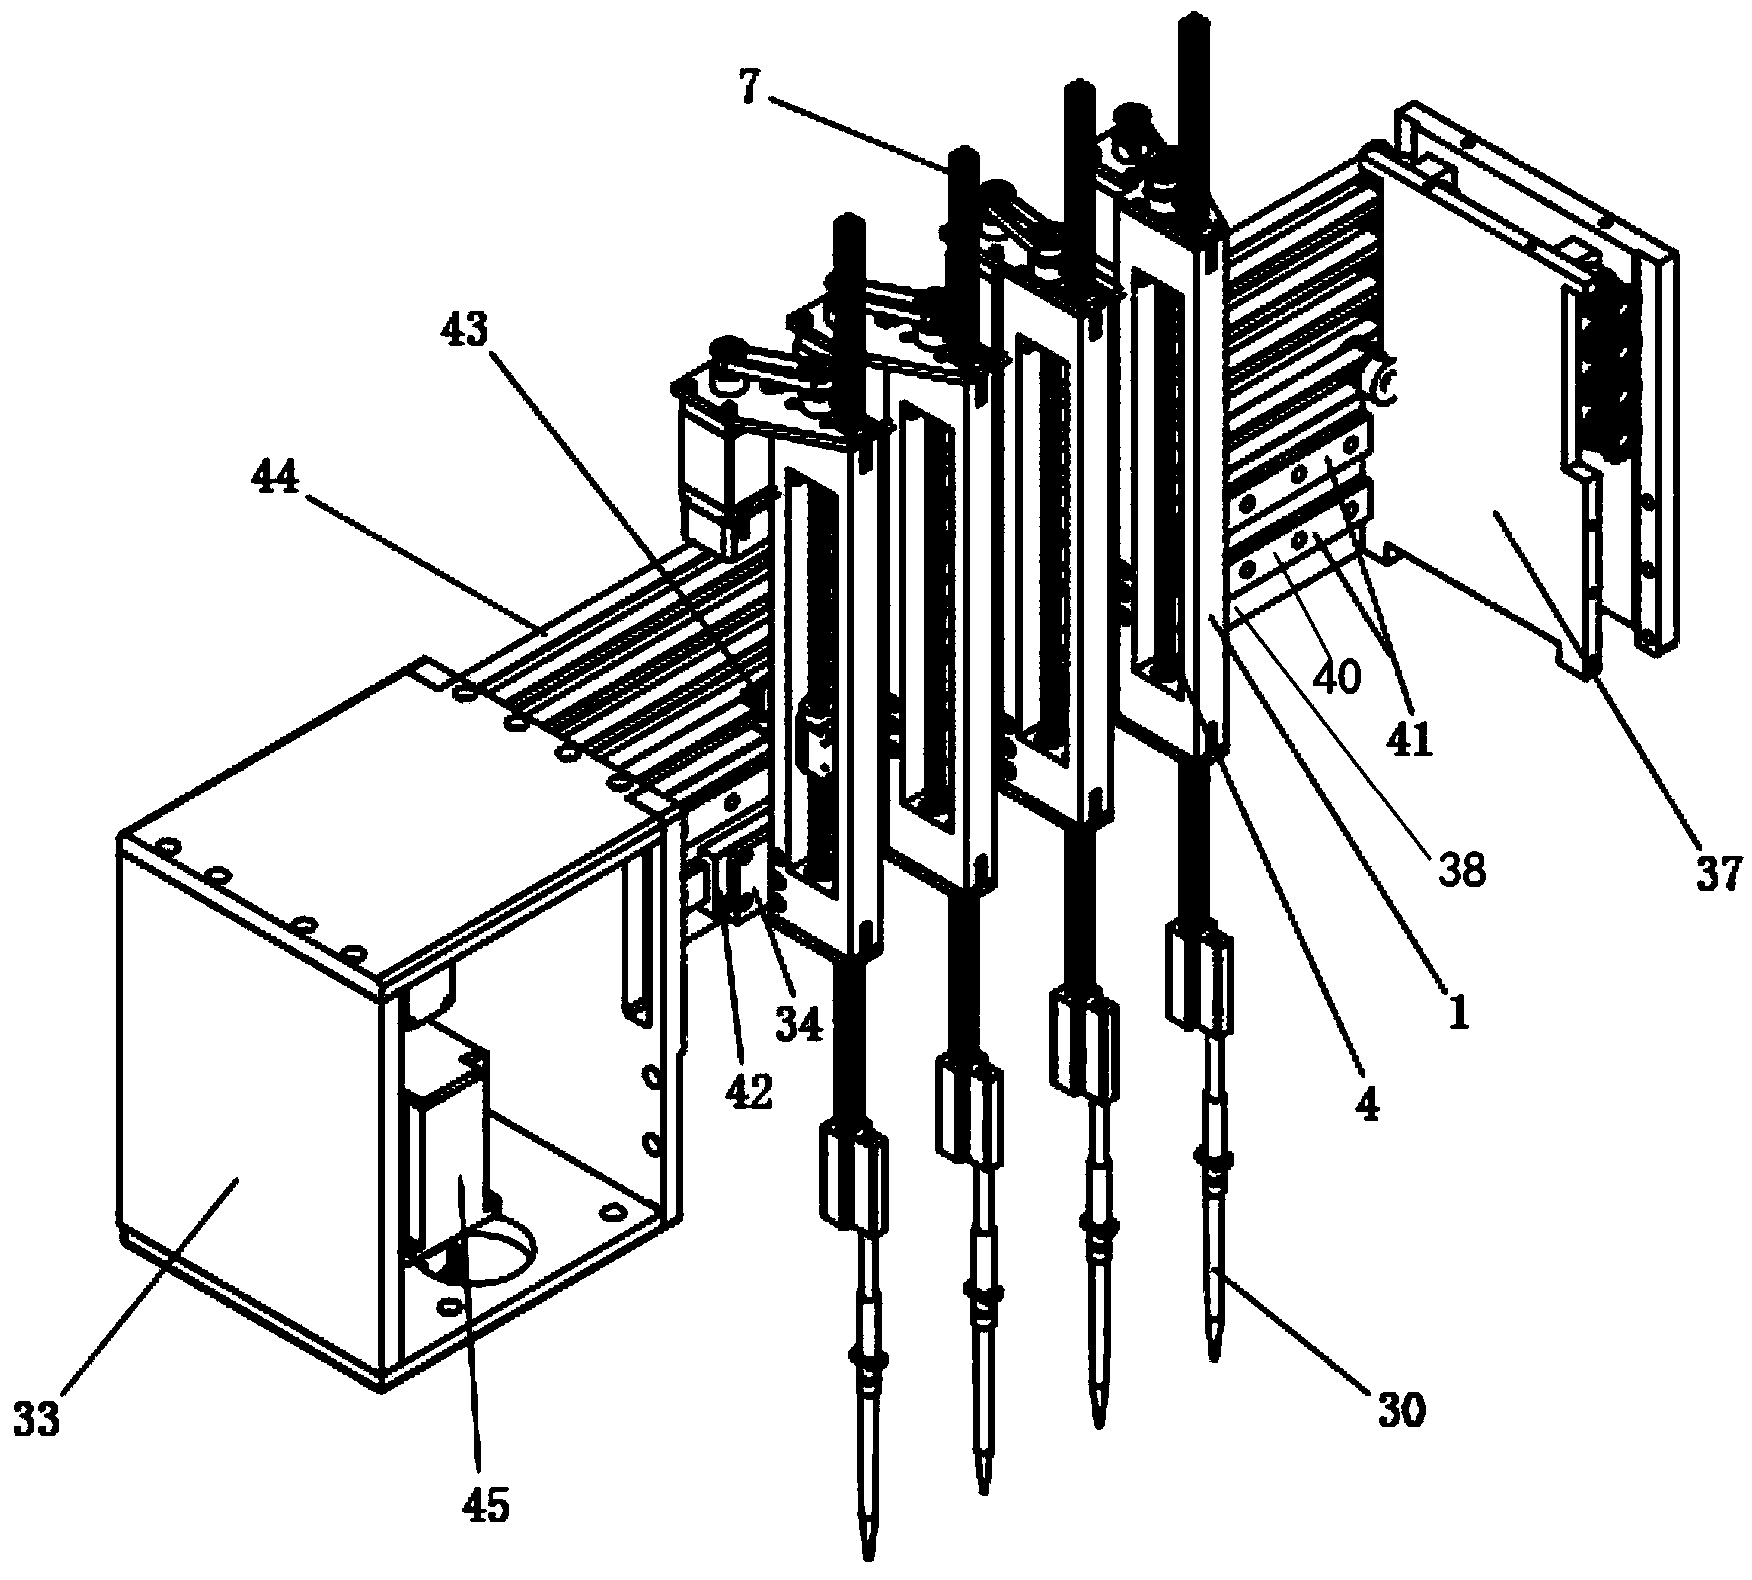 Full-automatic pipetting station and application thereof